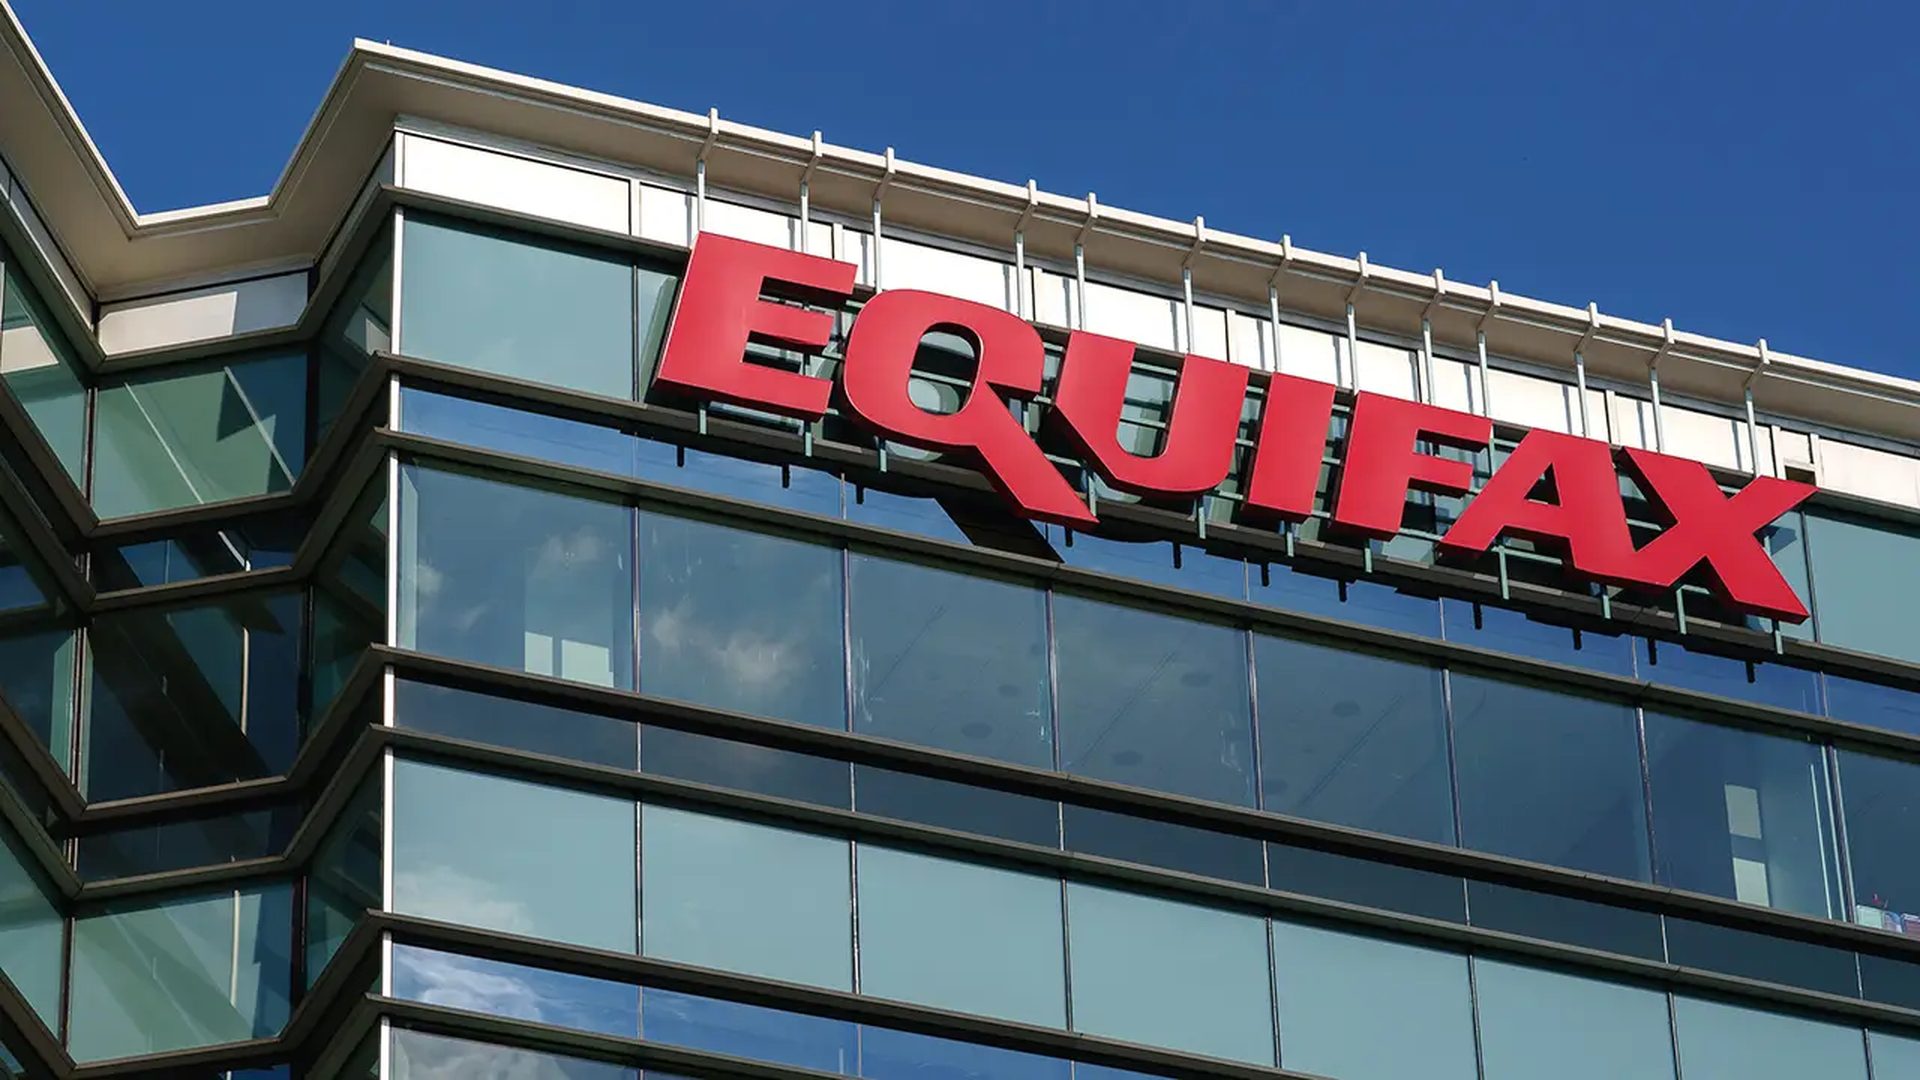 Has anyone received money from Equifax Settlement?